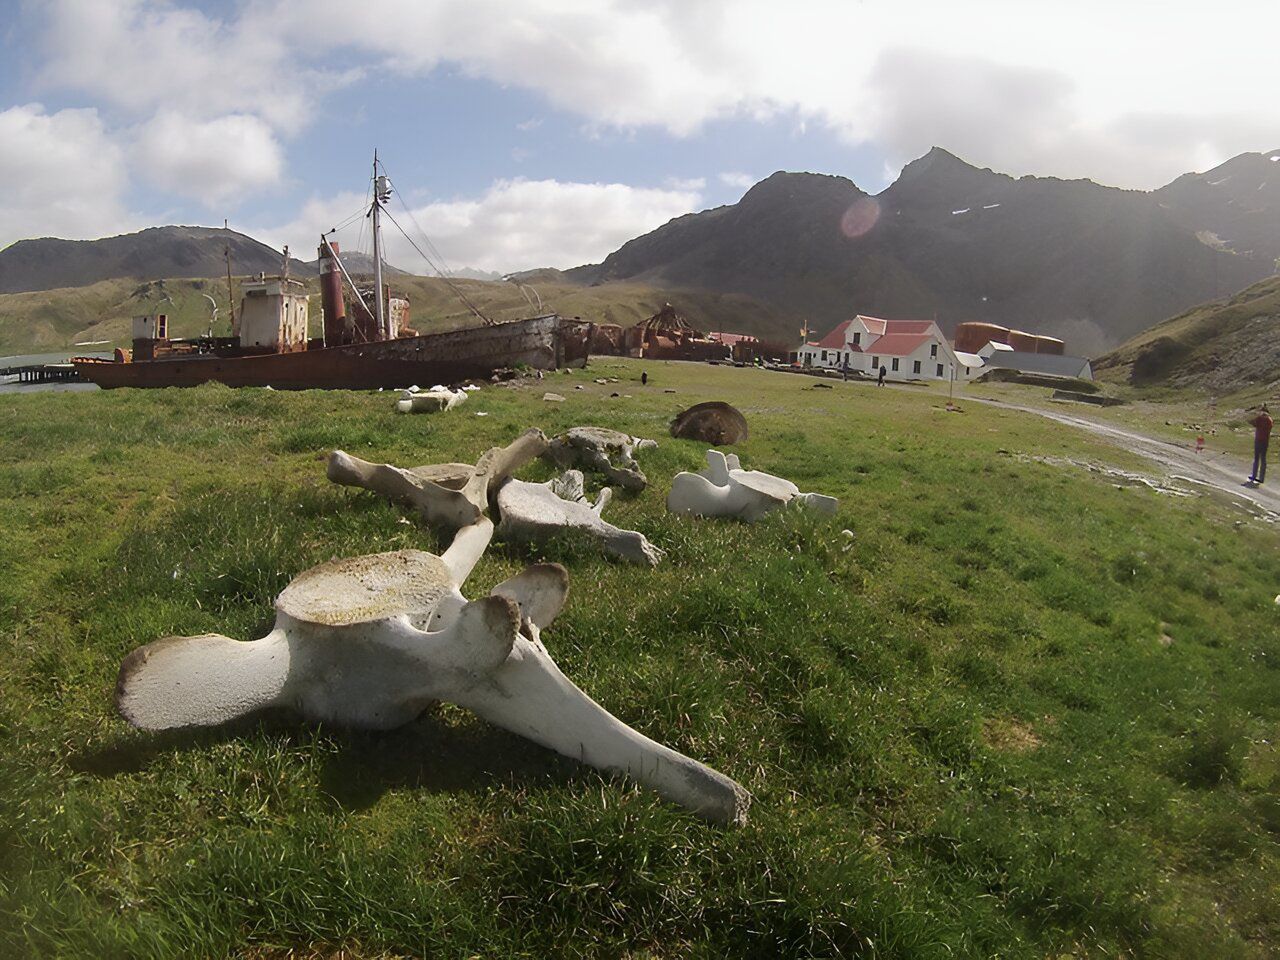 Whale bones helped researchers prove that hunting these animals has devastating consequences.